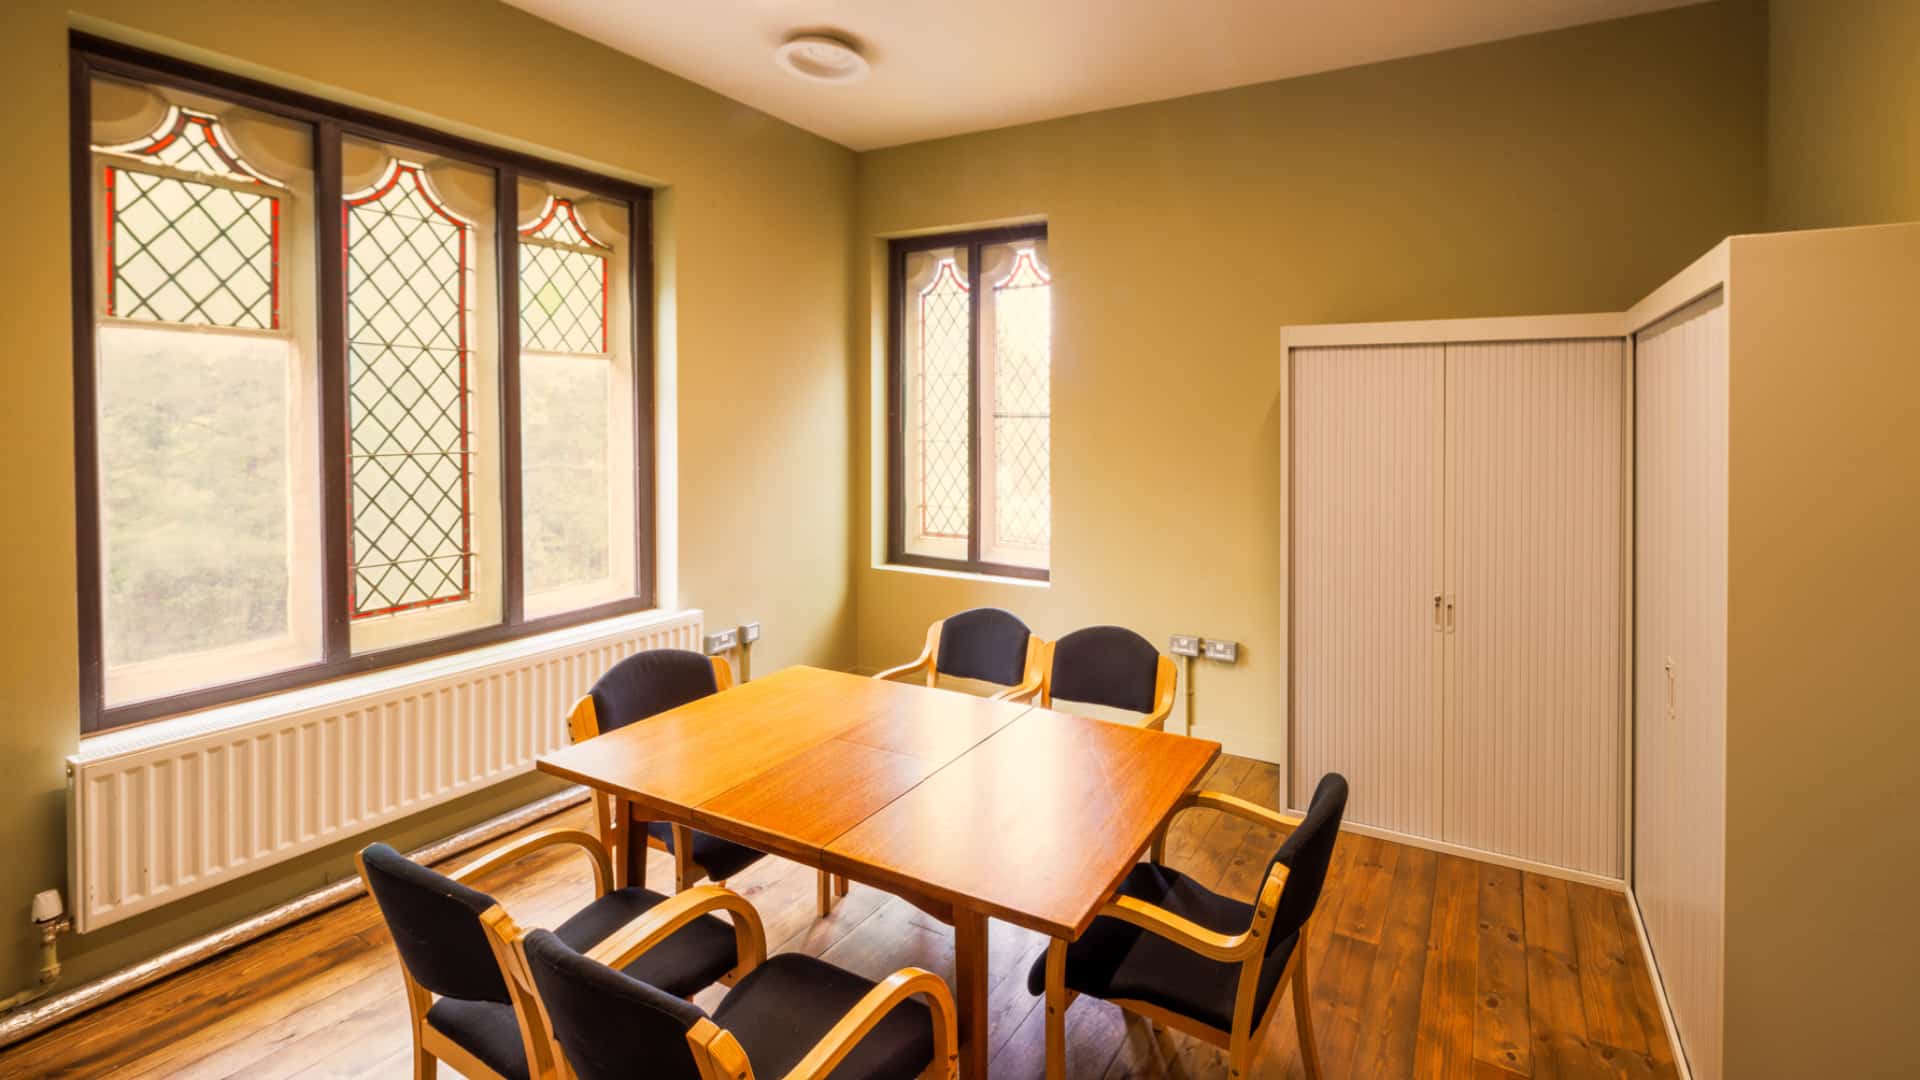 A small sunlight room with a table and six chairs